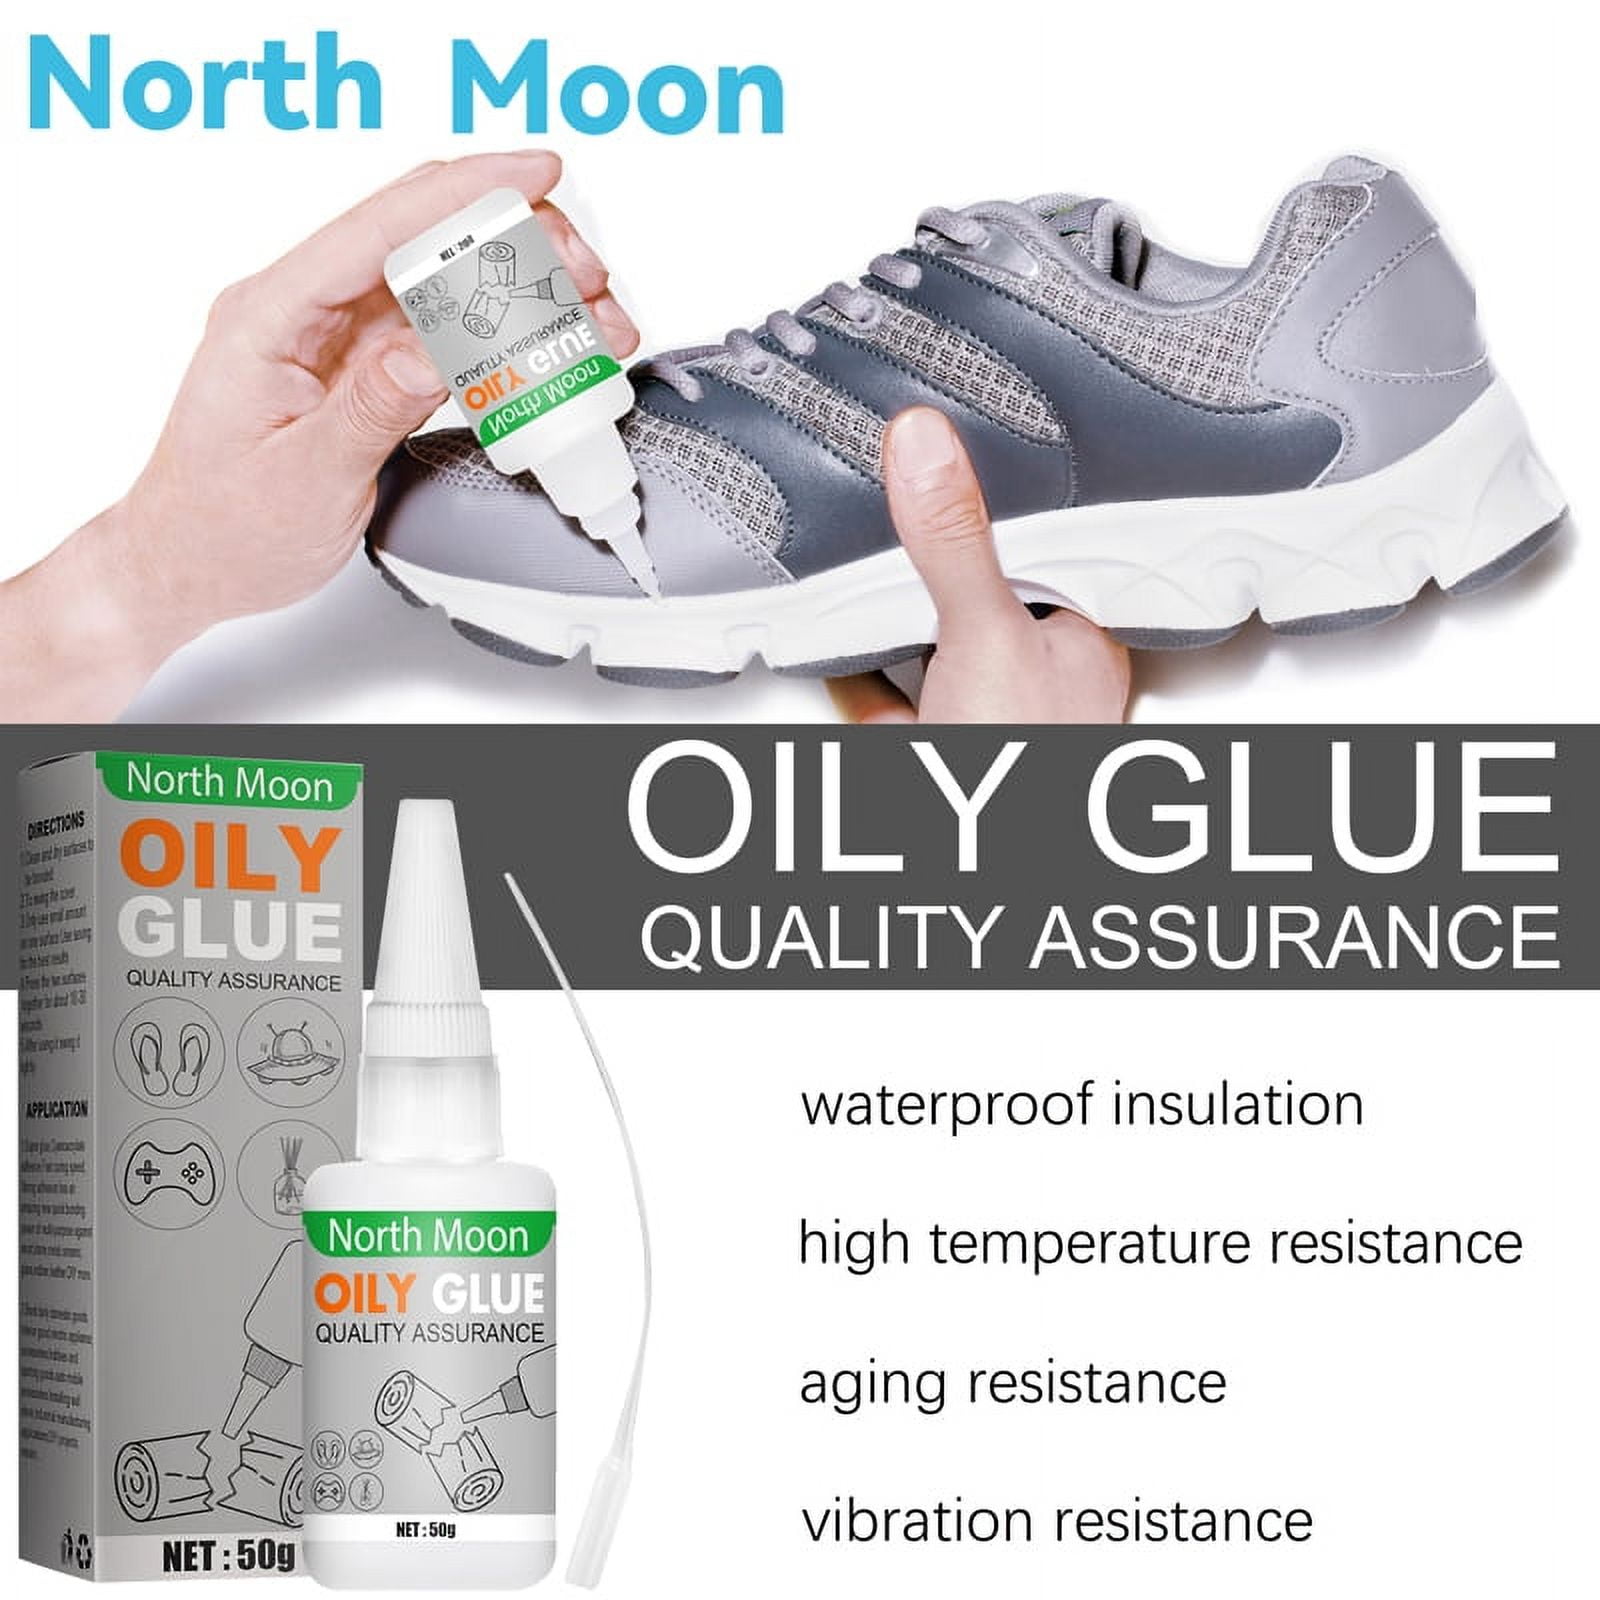 Super Strong Shoe Glue Professional Adhesive Strong Waterproof Rubber Sole  Repair Glue for Shoes Care Kit Sneakers Shoe Adhesive